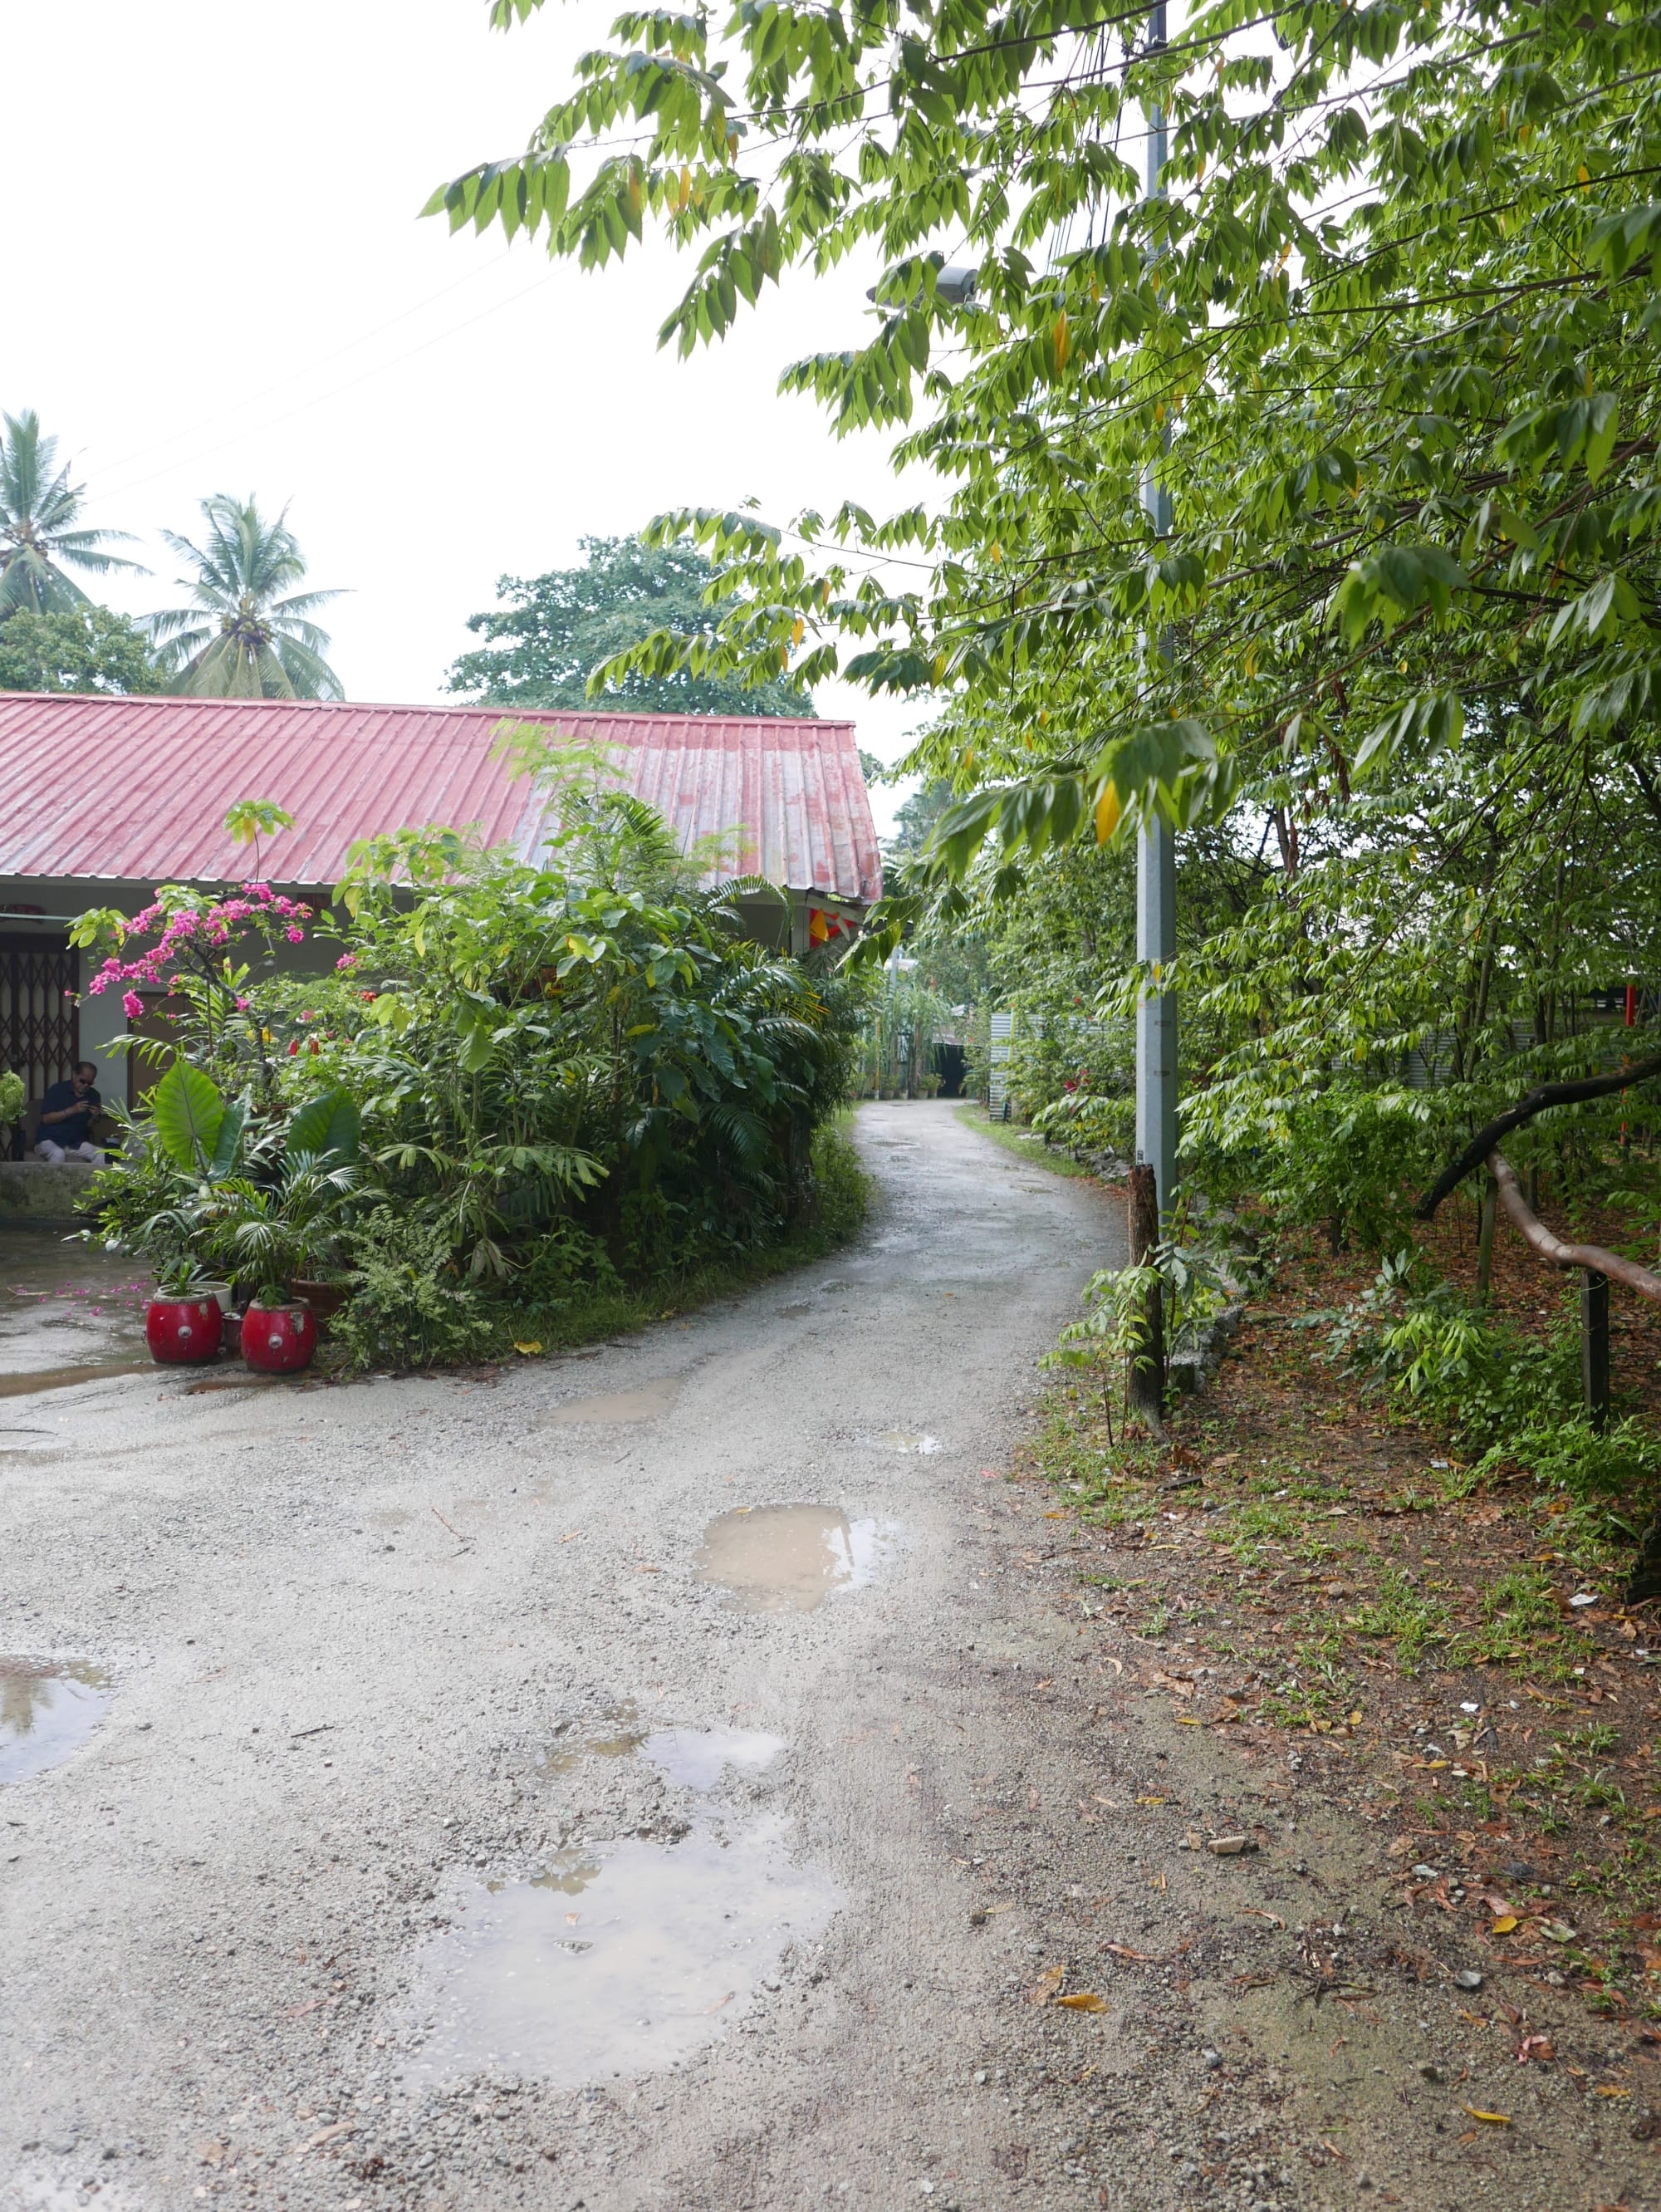 Photo by Author — the road into Kampong Lorong Buangkok, Singapore